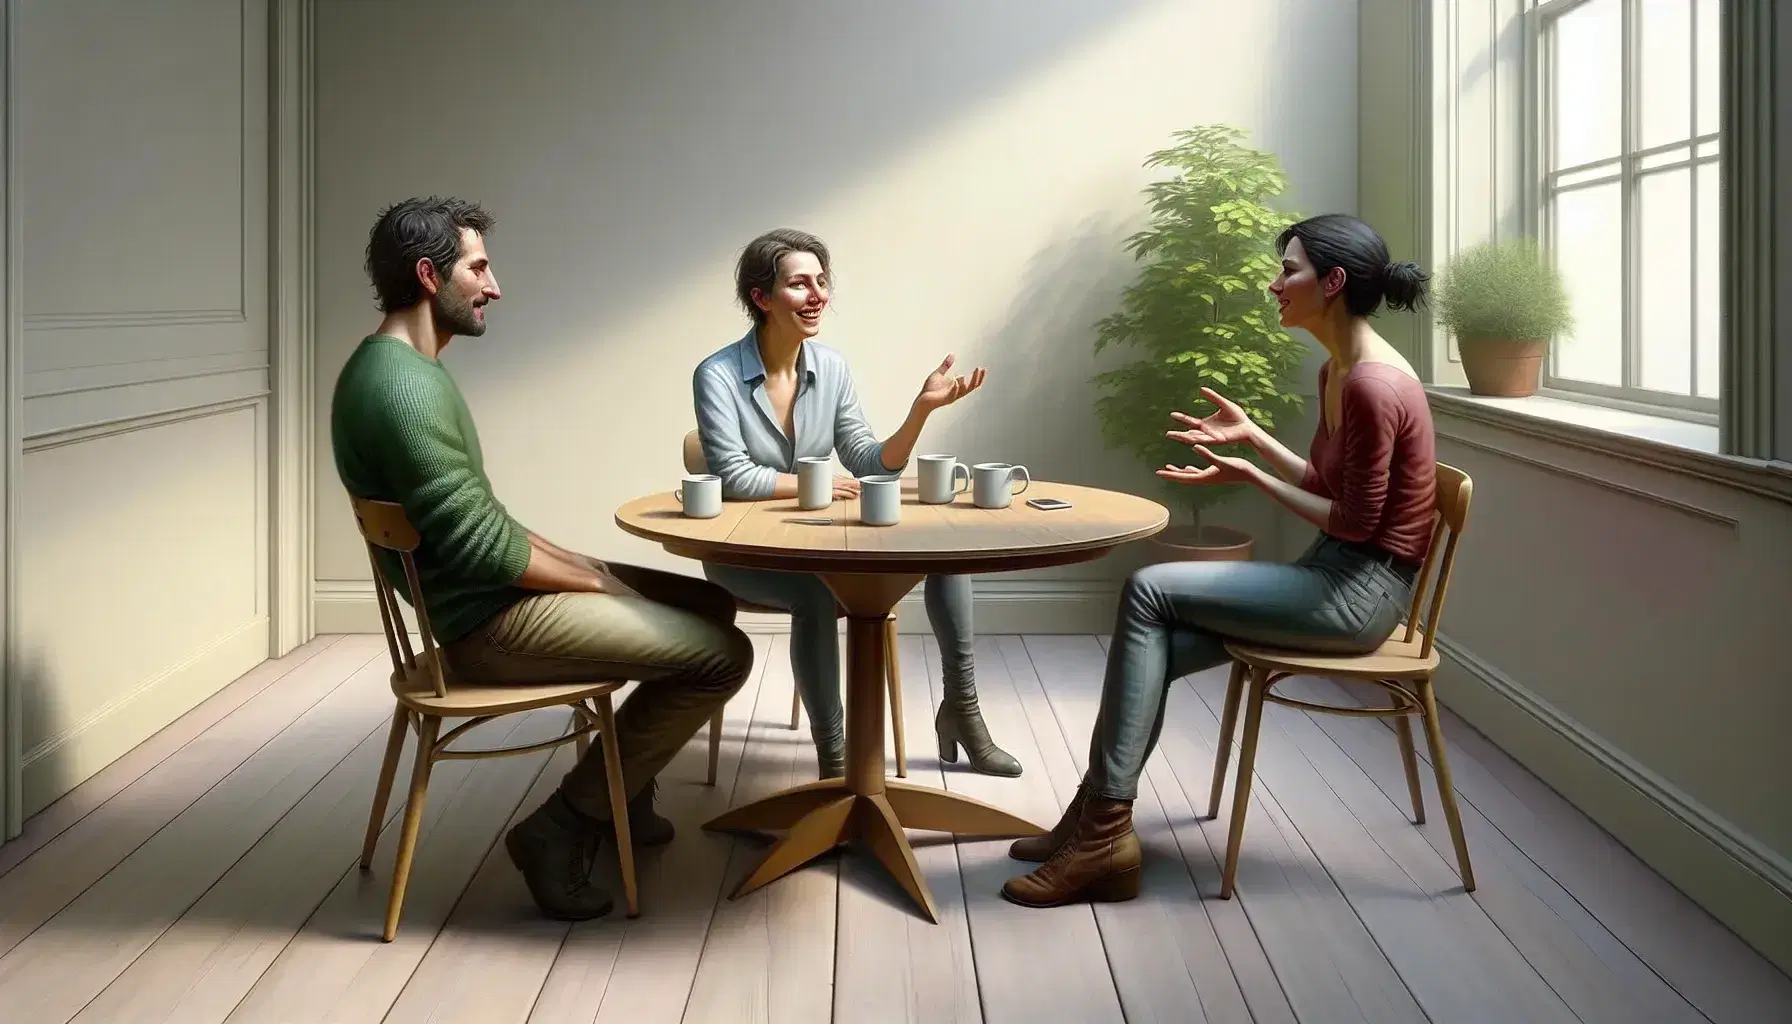 Three people sitting around a circular light wood table chatting animatedly in a room illuminated by natural light.